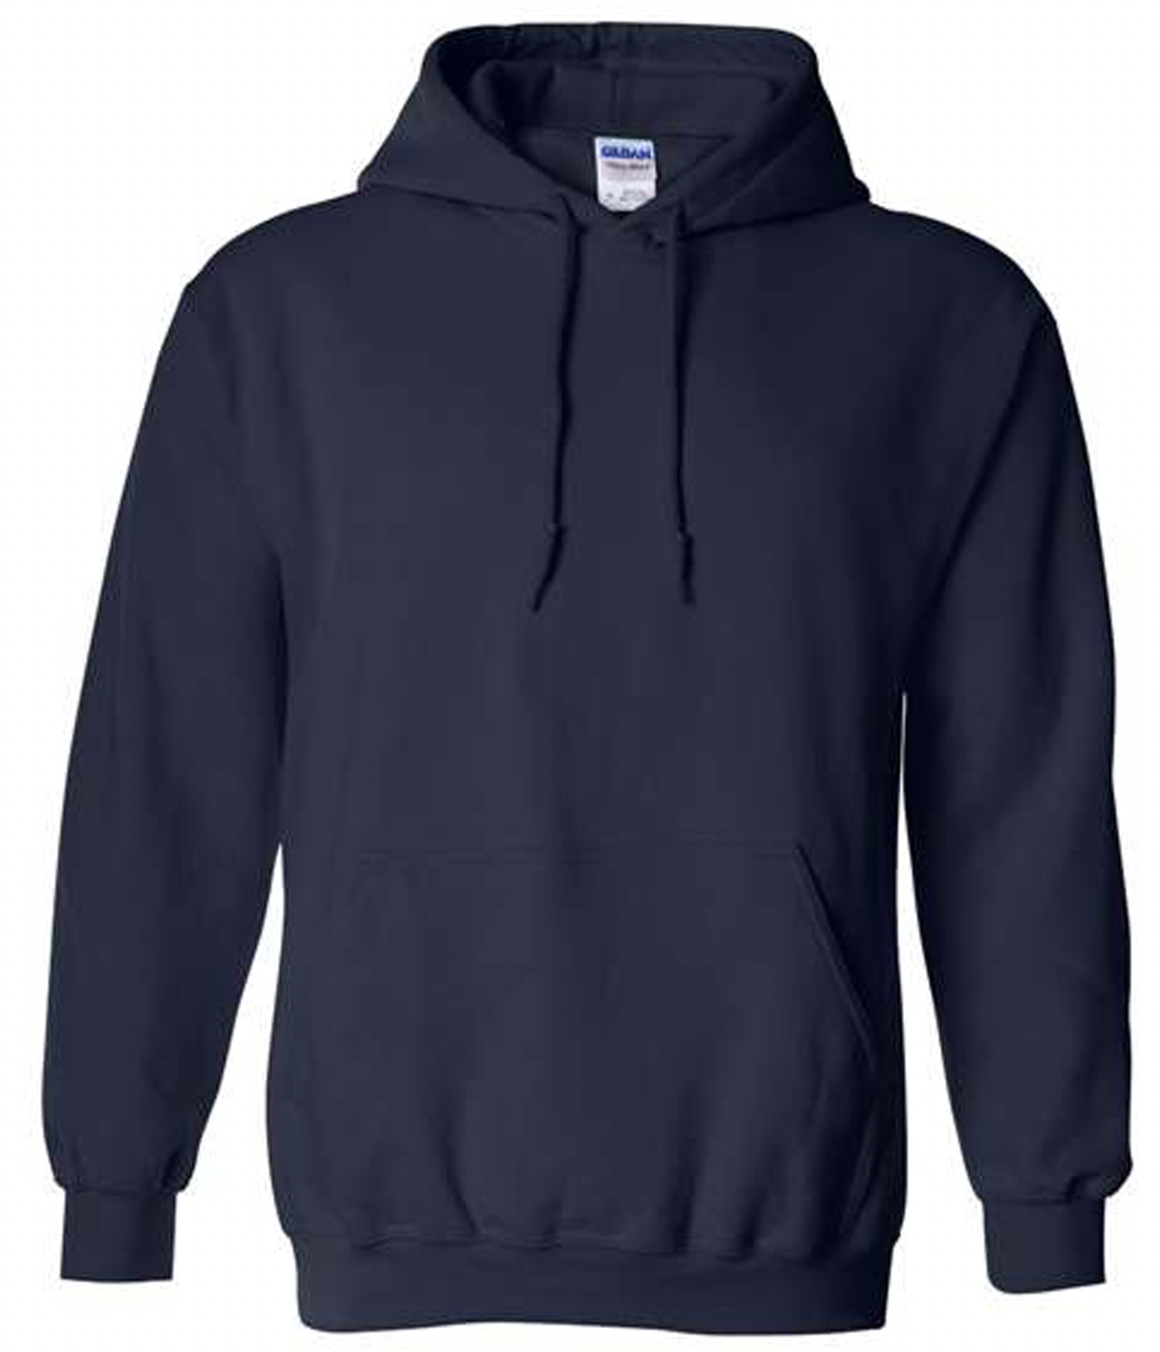 Left Chest Logo - Integrated Services Hoodies